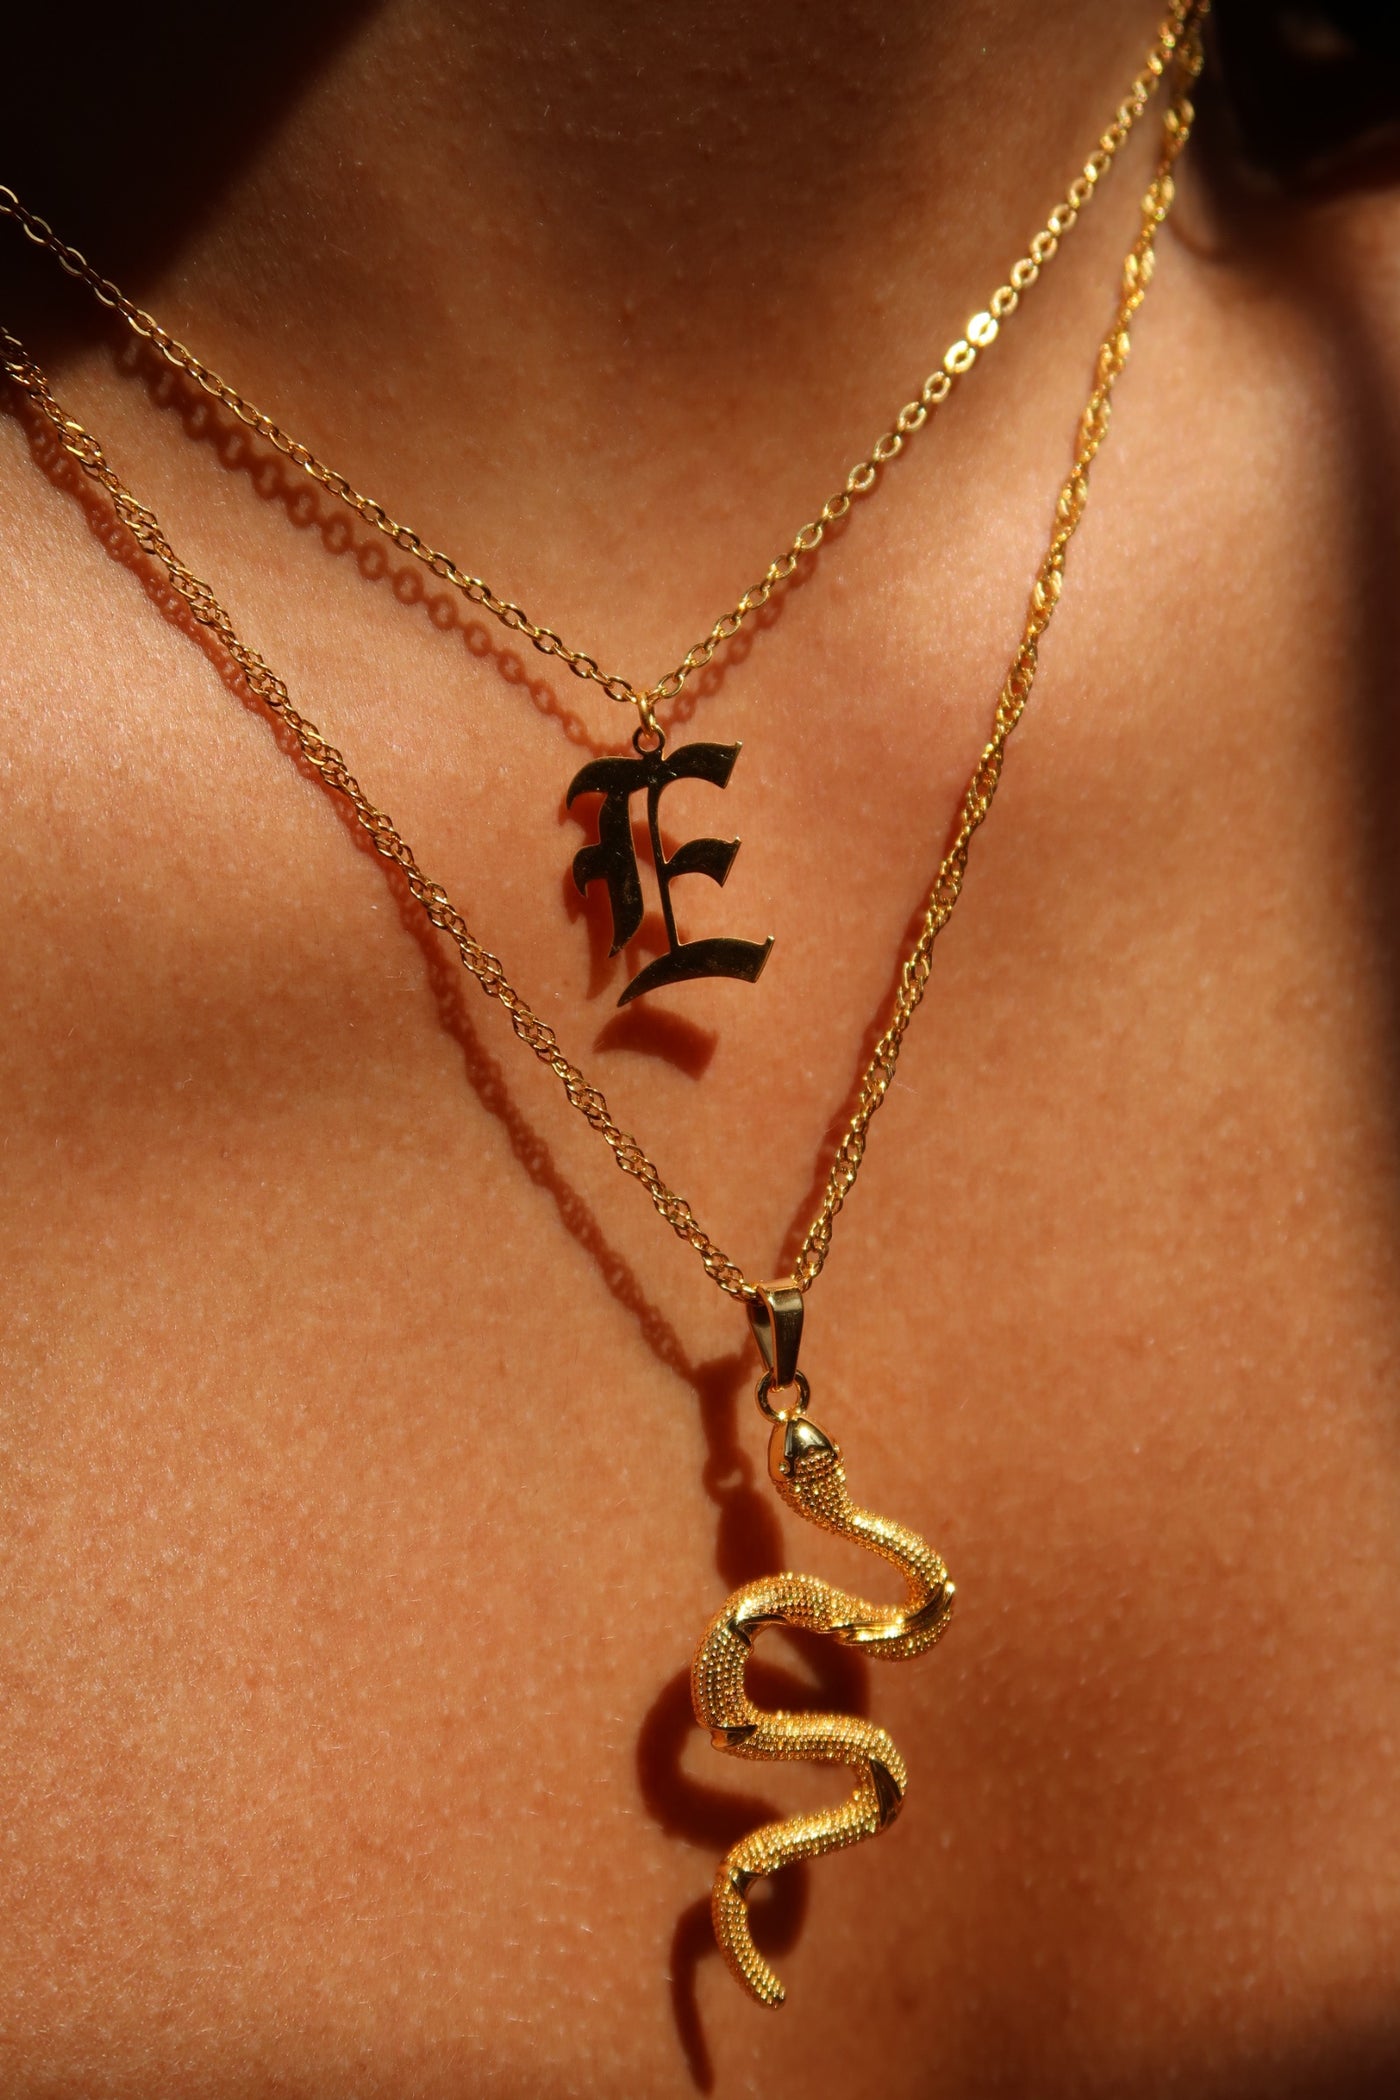 Gold Snake Necklace and letter initial necklace